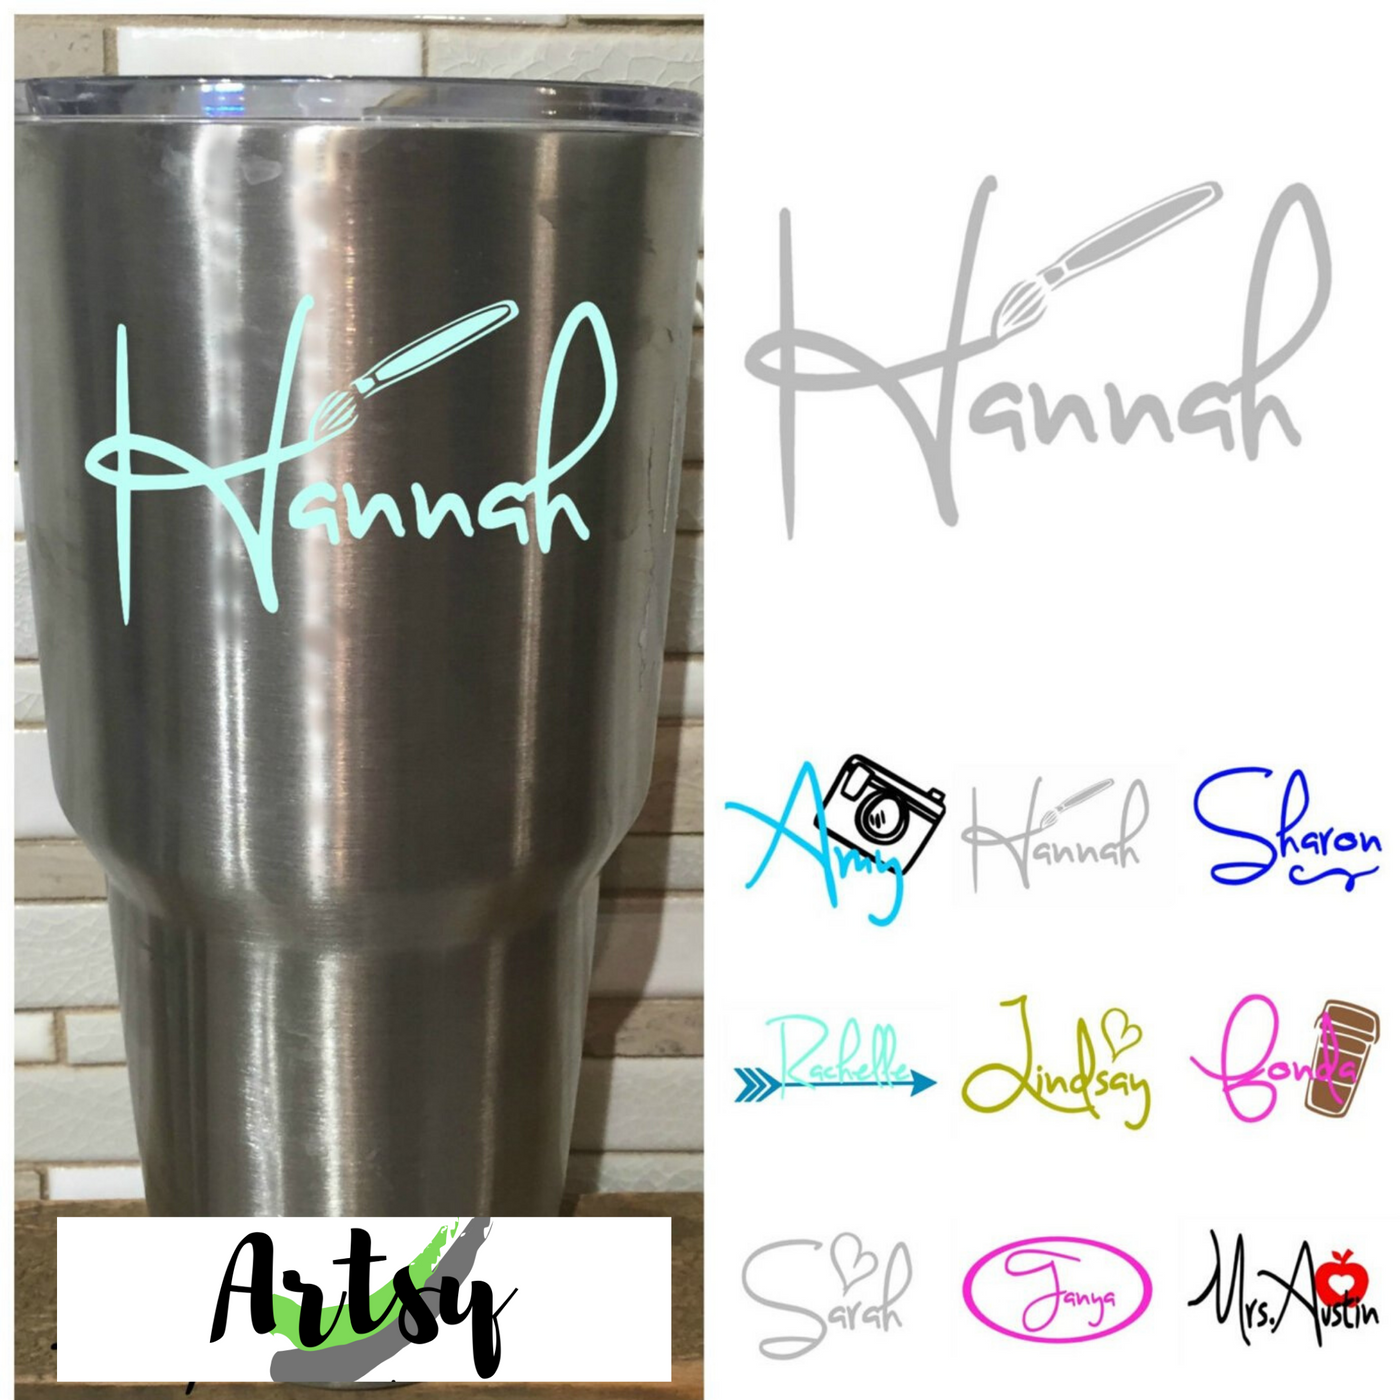 Tumbler name decals, window name decal – The Artsy Spot